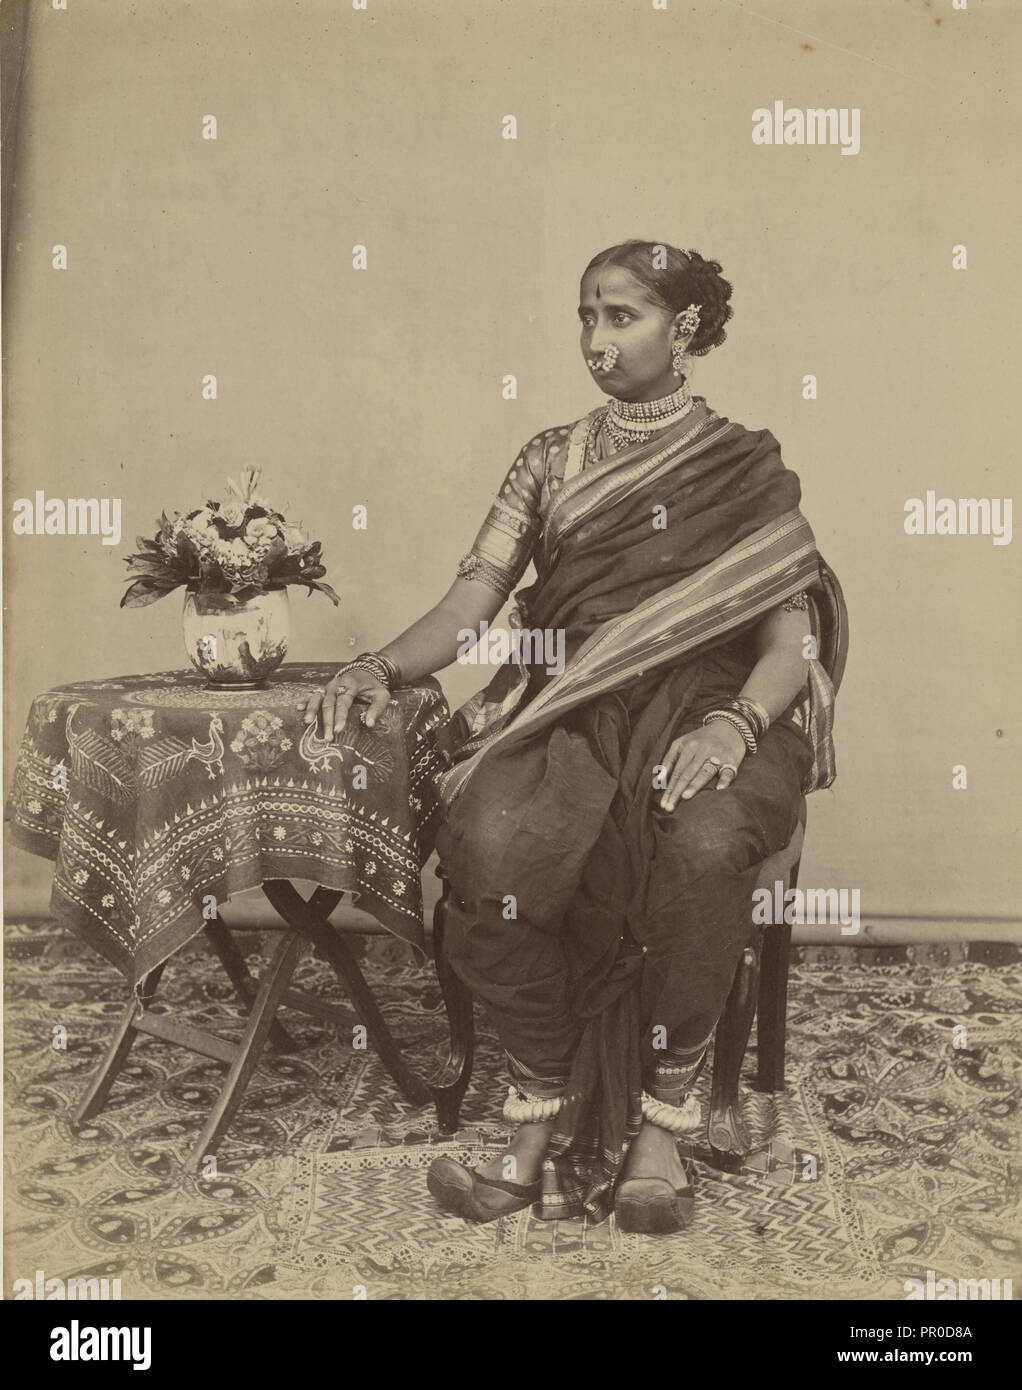 Wife of 1st Class Sirday - Pause BoC.S; India; 1886 - 1889; Albumen silver print Stock Photo